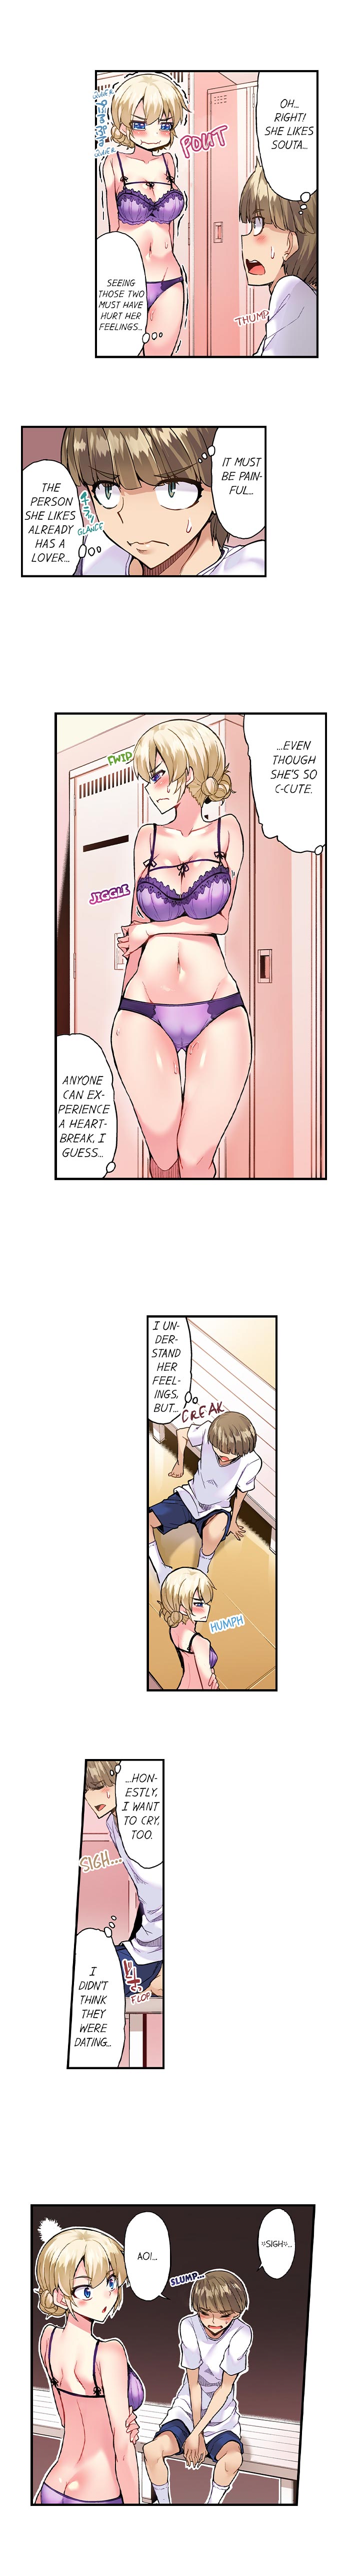 Traditional Job of Washing Girls’ Body - Chapter 89 Page 6